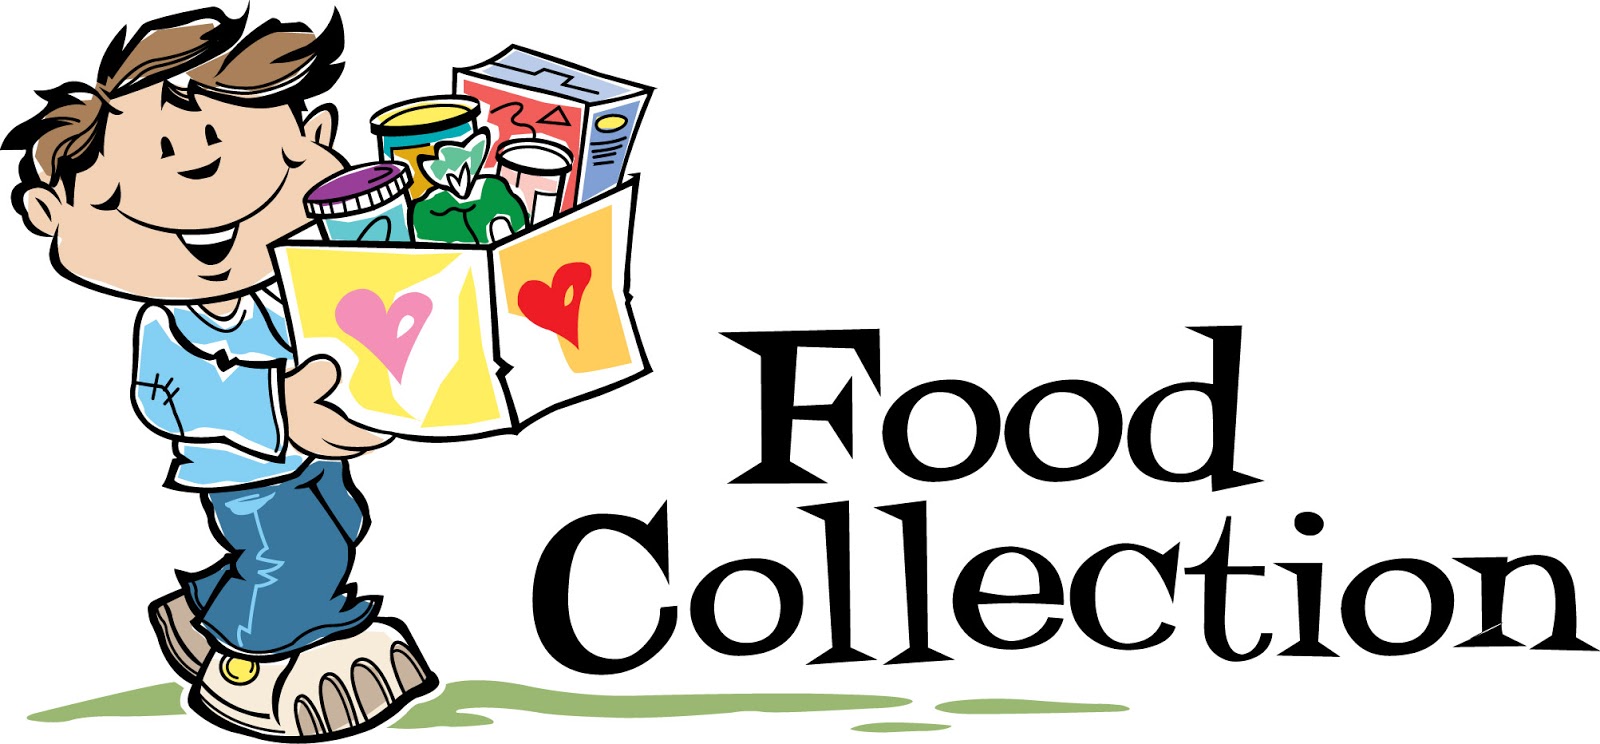 Food pantry donations clipart